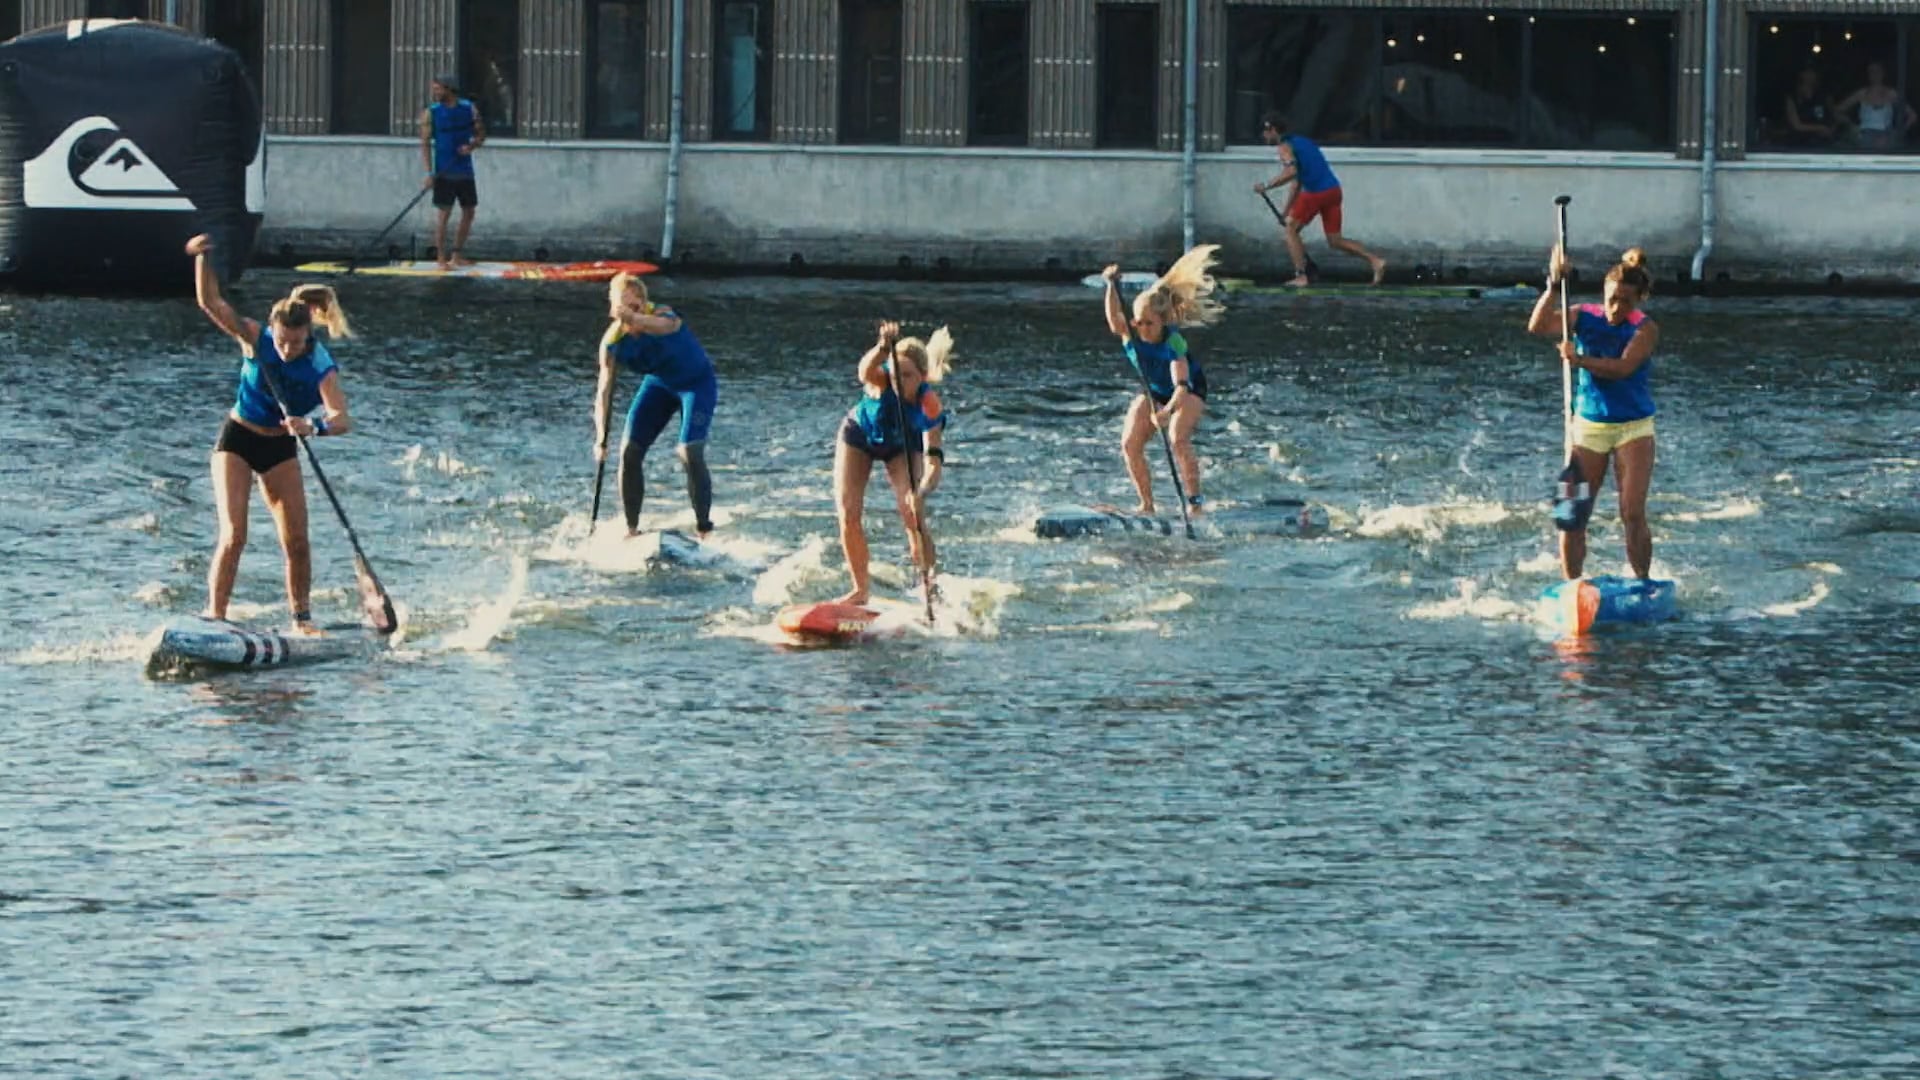 FULL BROADCAST - London Sup Open Long Distance Racing Day 2 - 2018